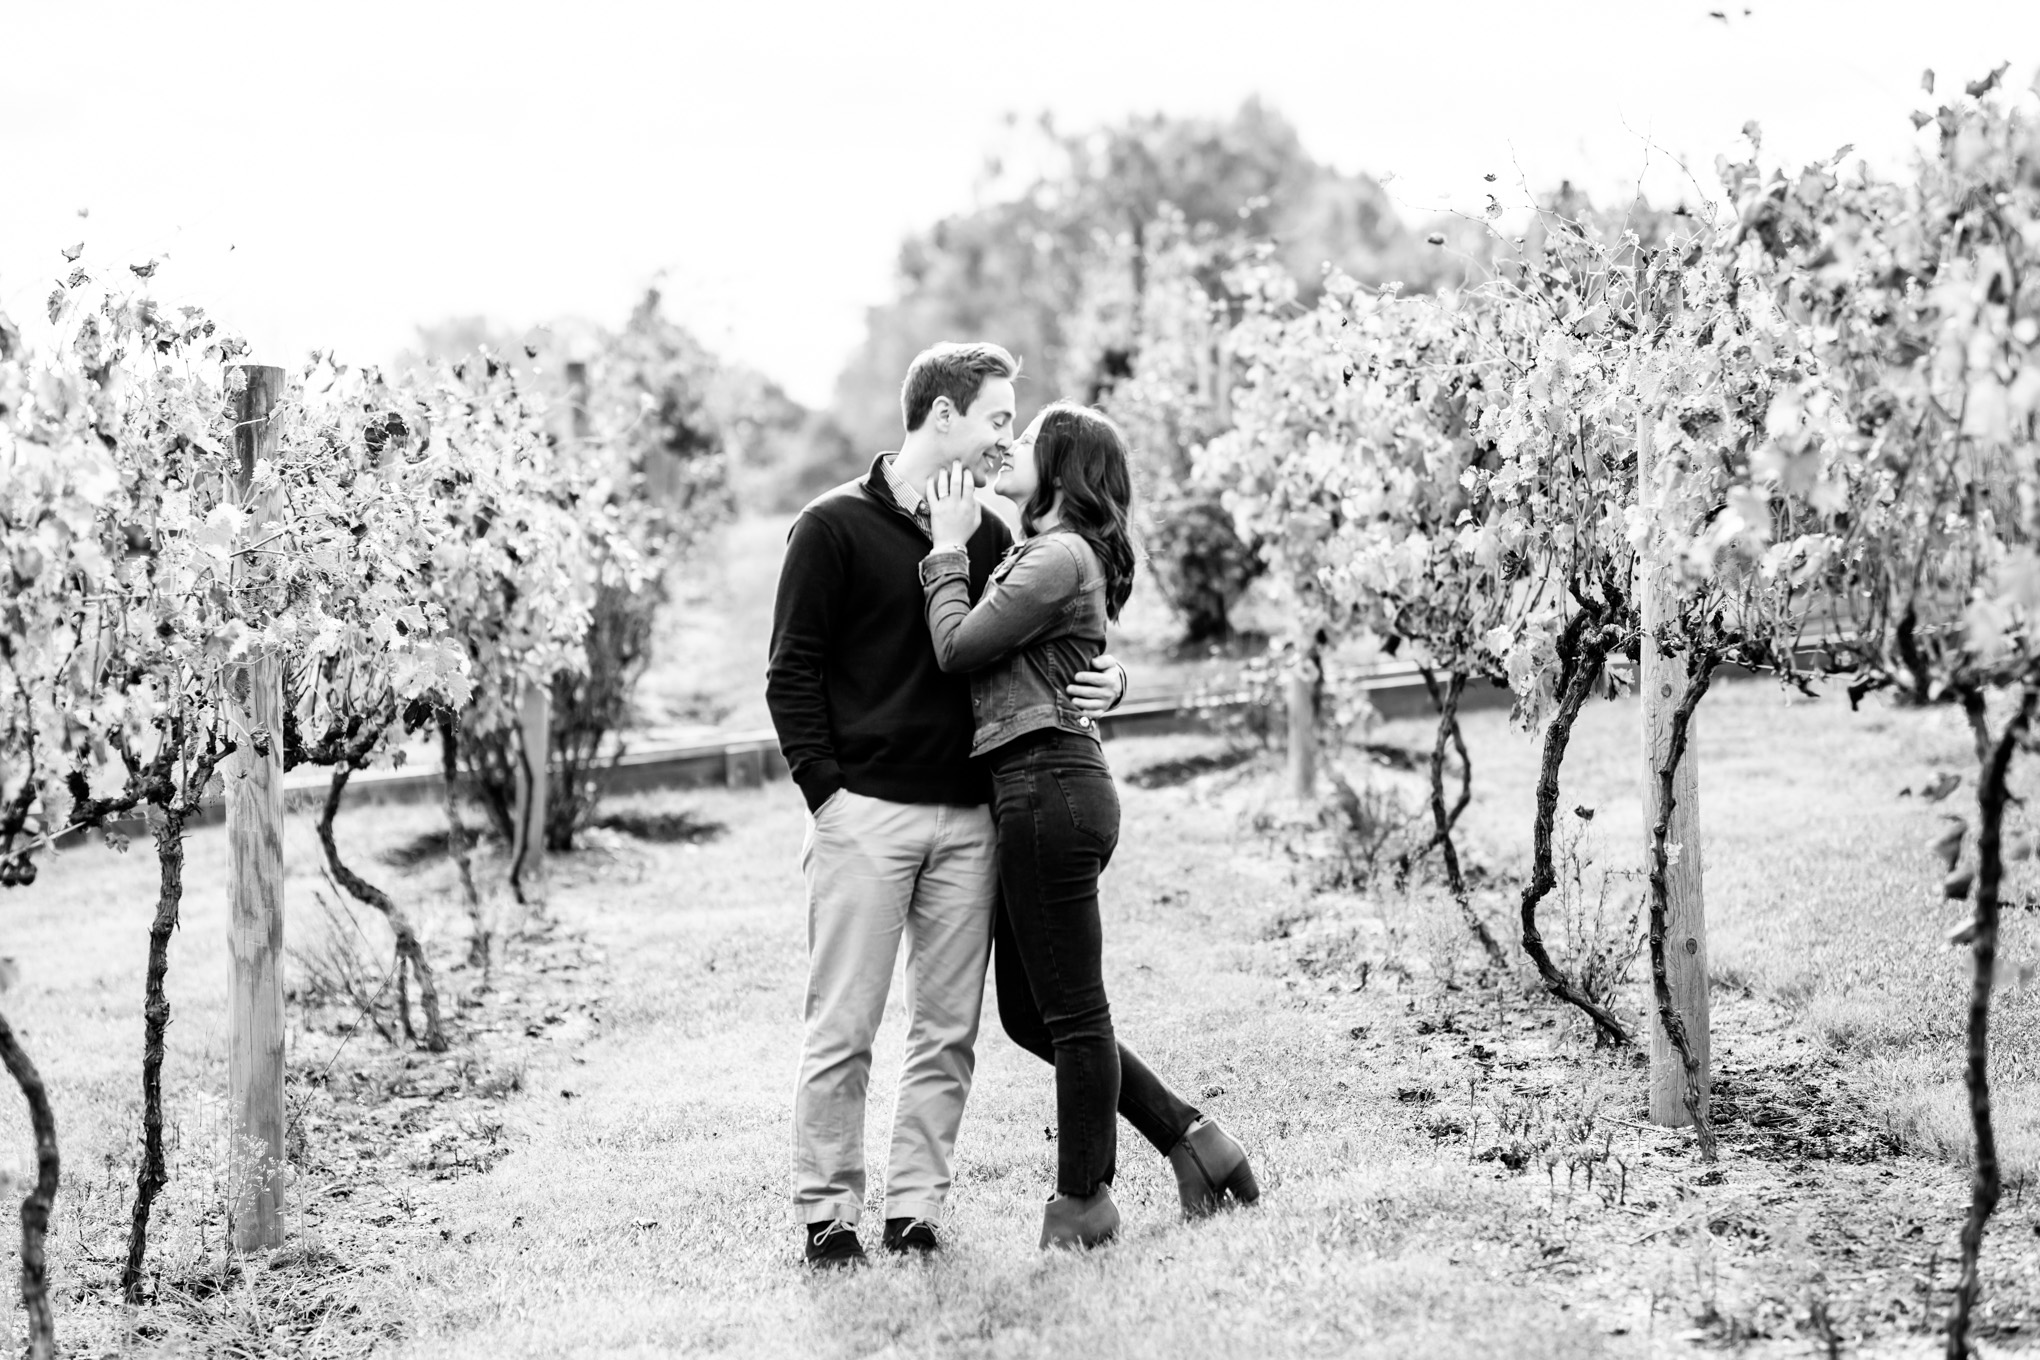 Running Hare Vineyard surprise proposal, Maryland winery, Maryland proposal photographer, D.C. proposal photographer, Maryland engagement, surprise proposal, Running Hare Vineyard proposal, Running Hare Vineyard, D.C. wedding photographer, Rachel E.H. Photography, autumn proposal, autumn surprise proposal, black and white portrait